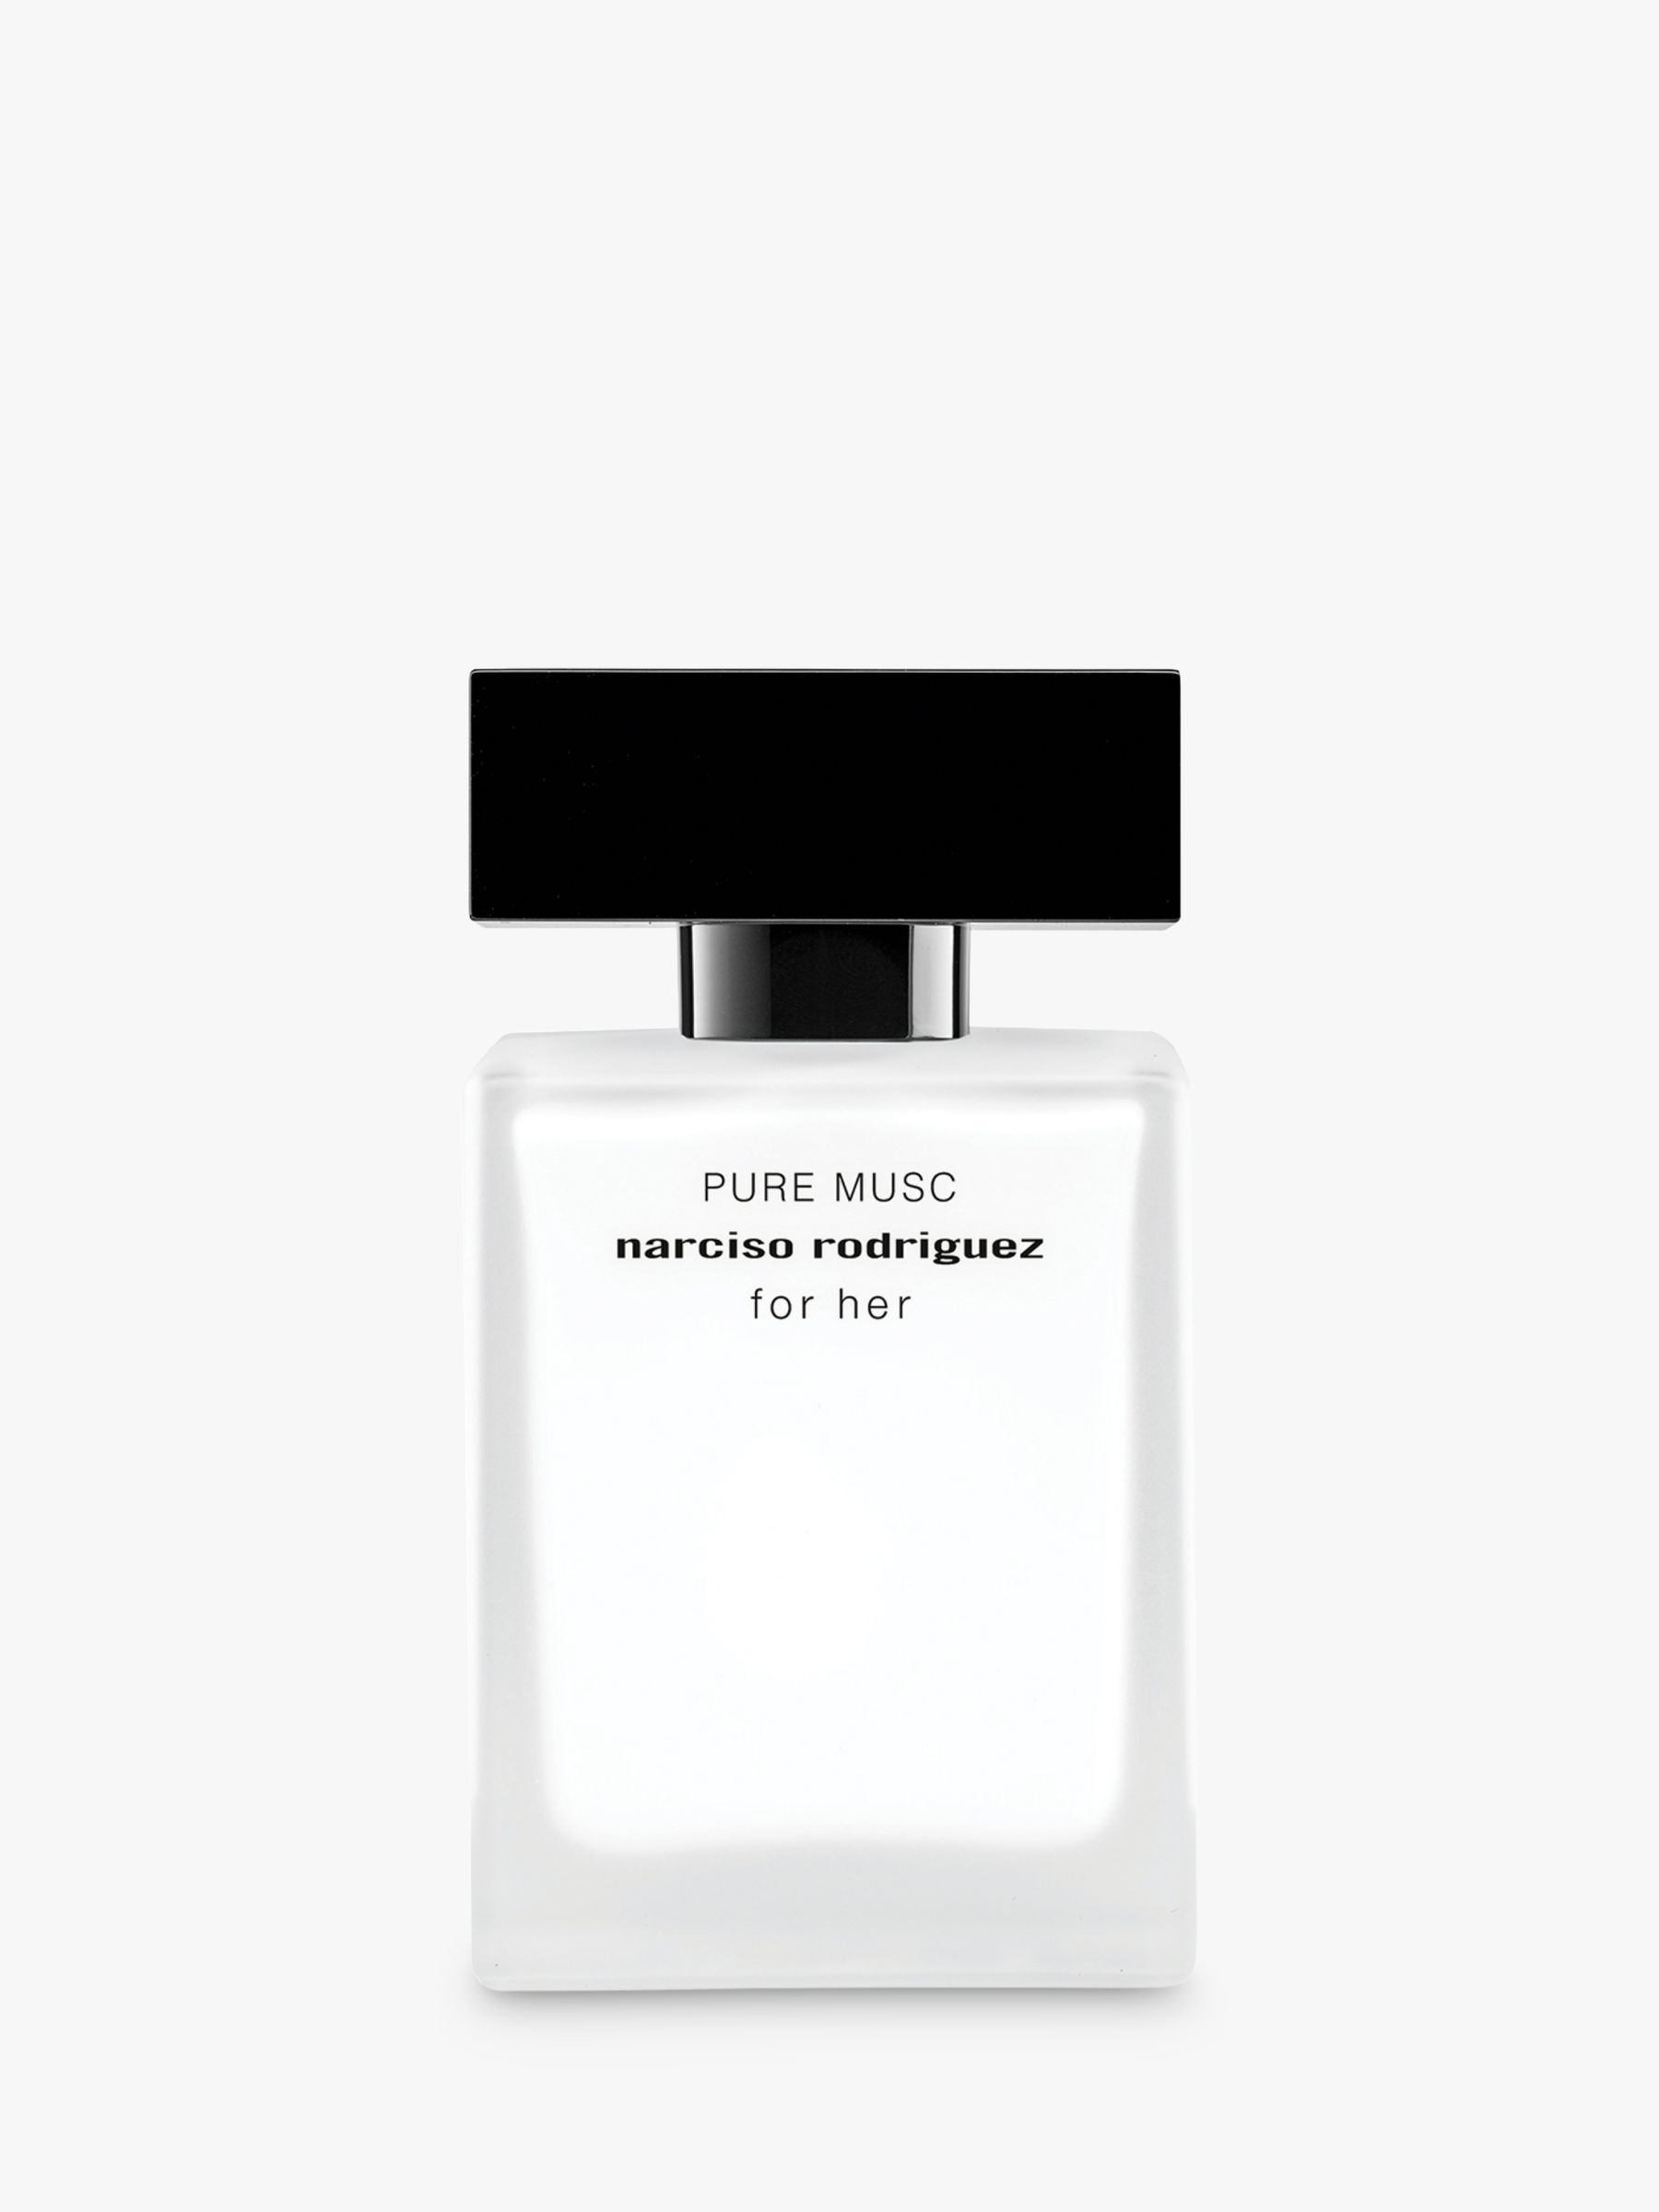 Narciso Rodriguez For Her Pure Musc Eau de 30ml at John Lewis & Partners